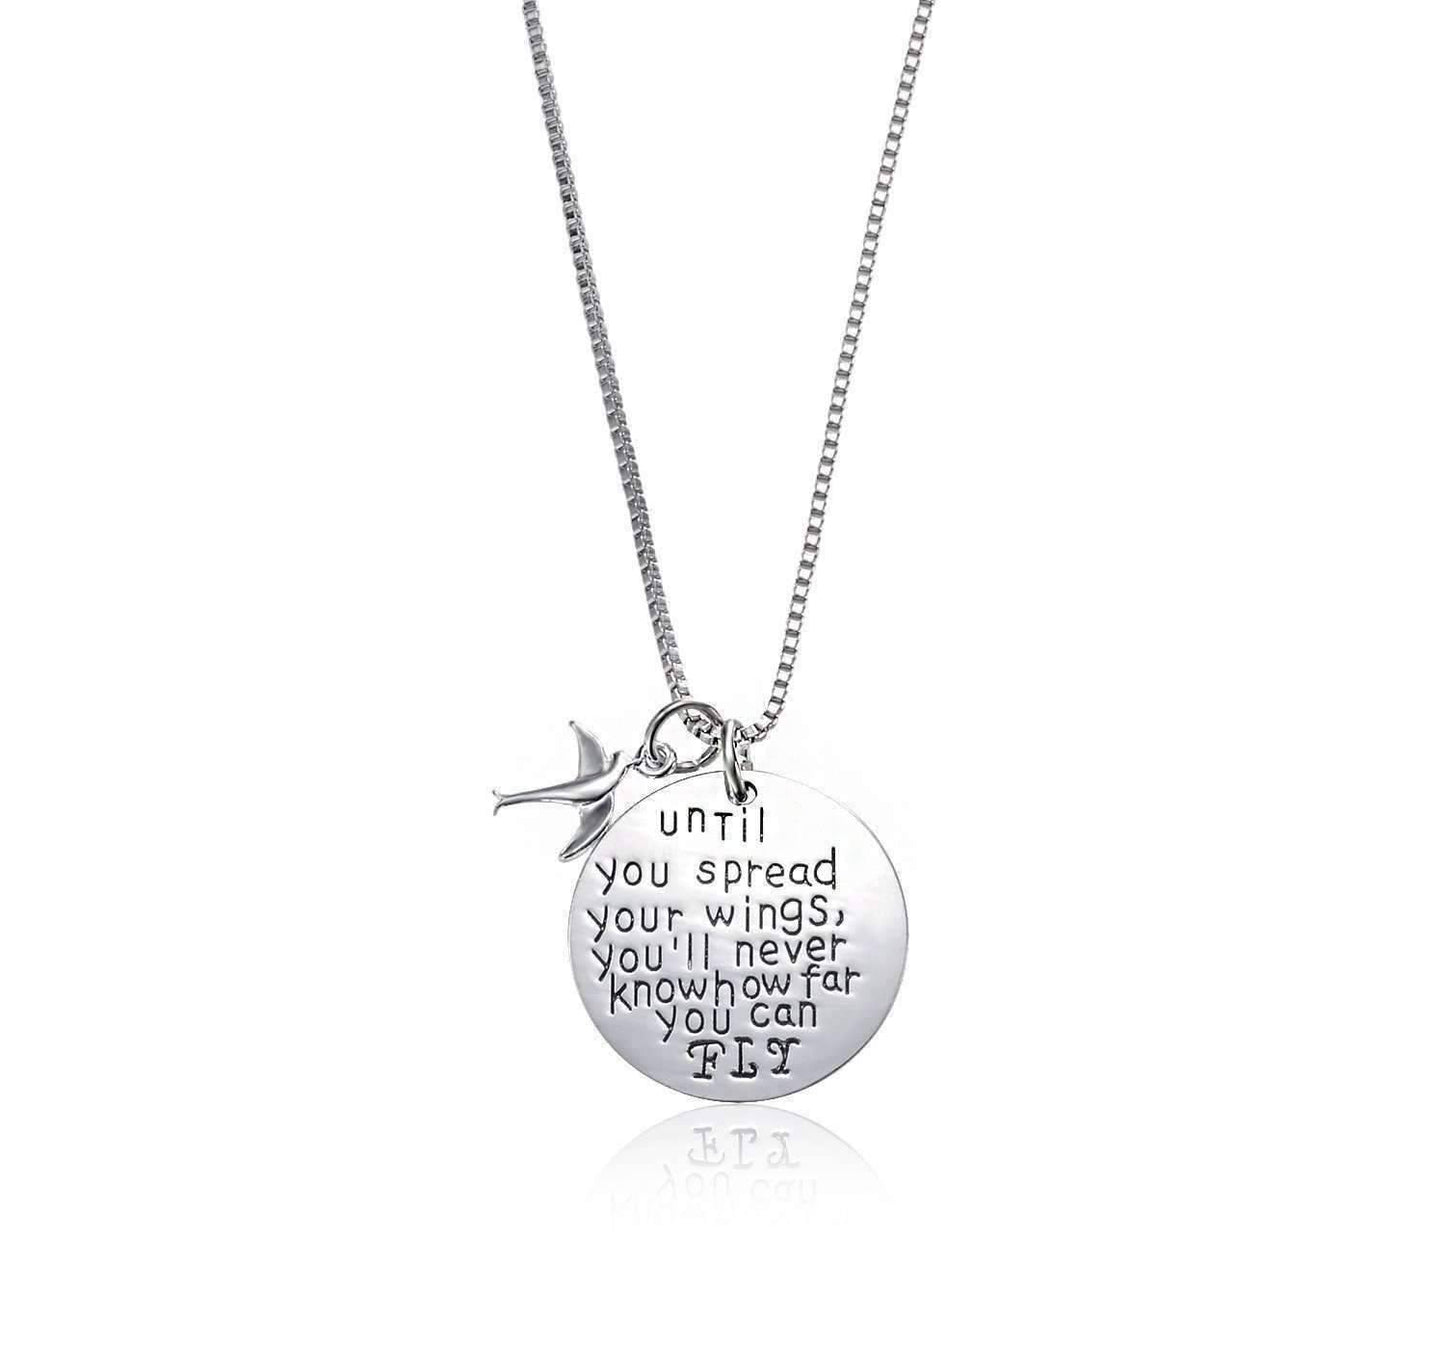 Feshionn IOBI Necklaces ON SALE - "Until You Spread Your Wings, You'll Never Know How Far You Can FLY" Inspirational Charm Necklace